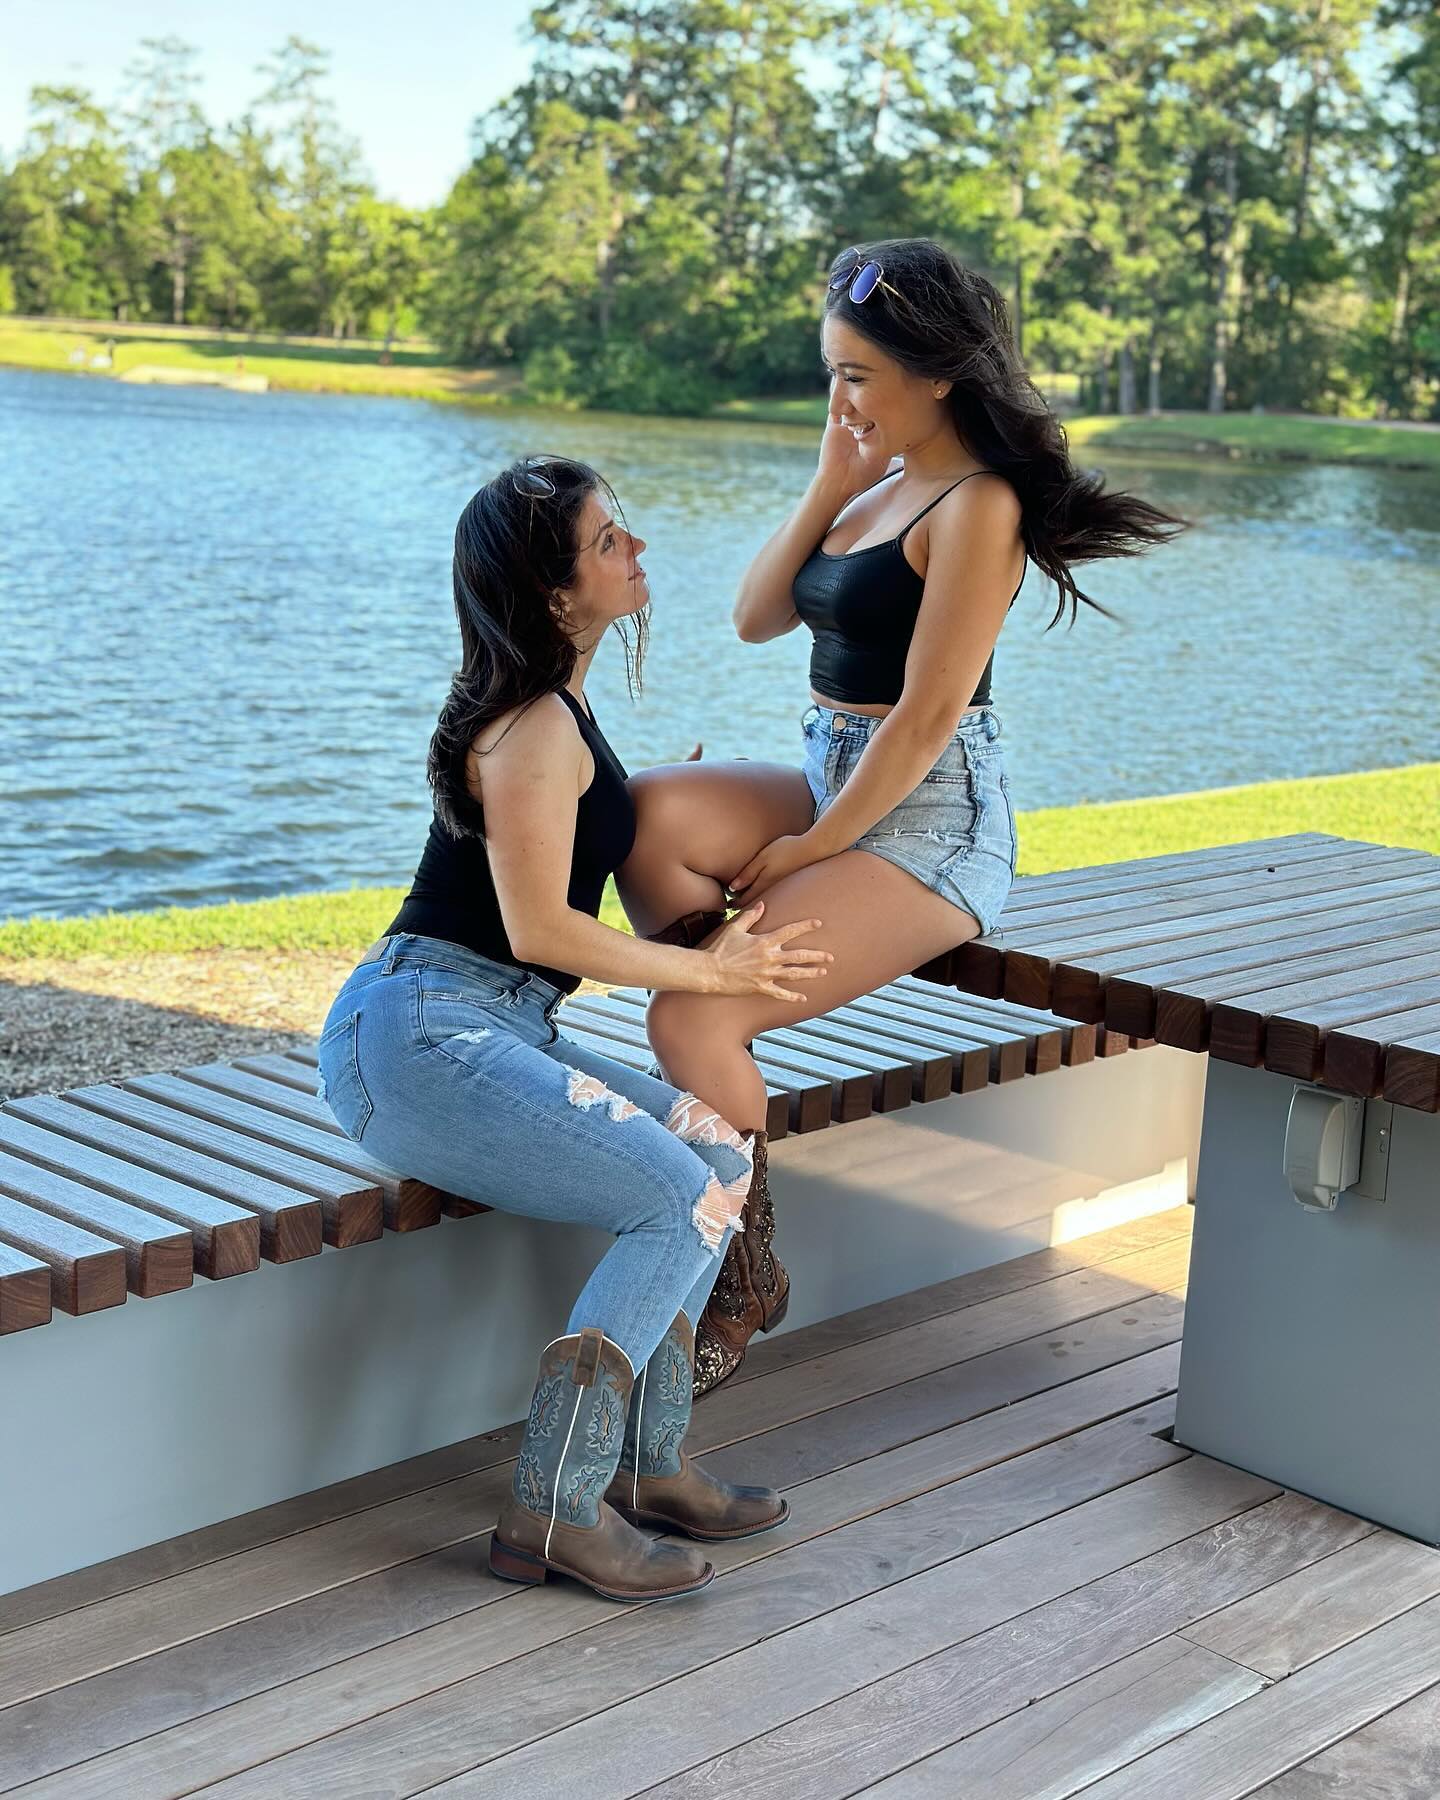 She said yes 💕

#picoftheday #instadaily #cowboyboots #friendshipgoals